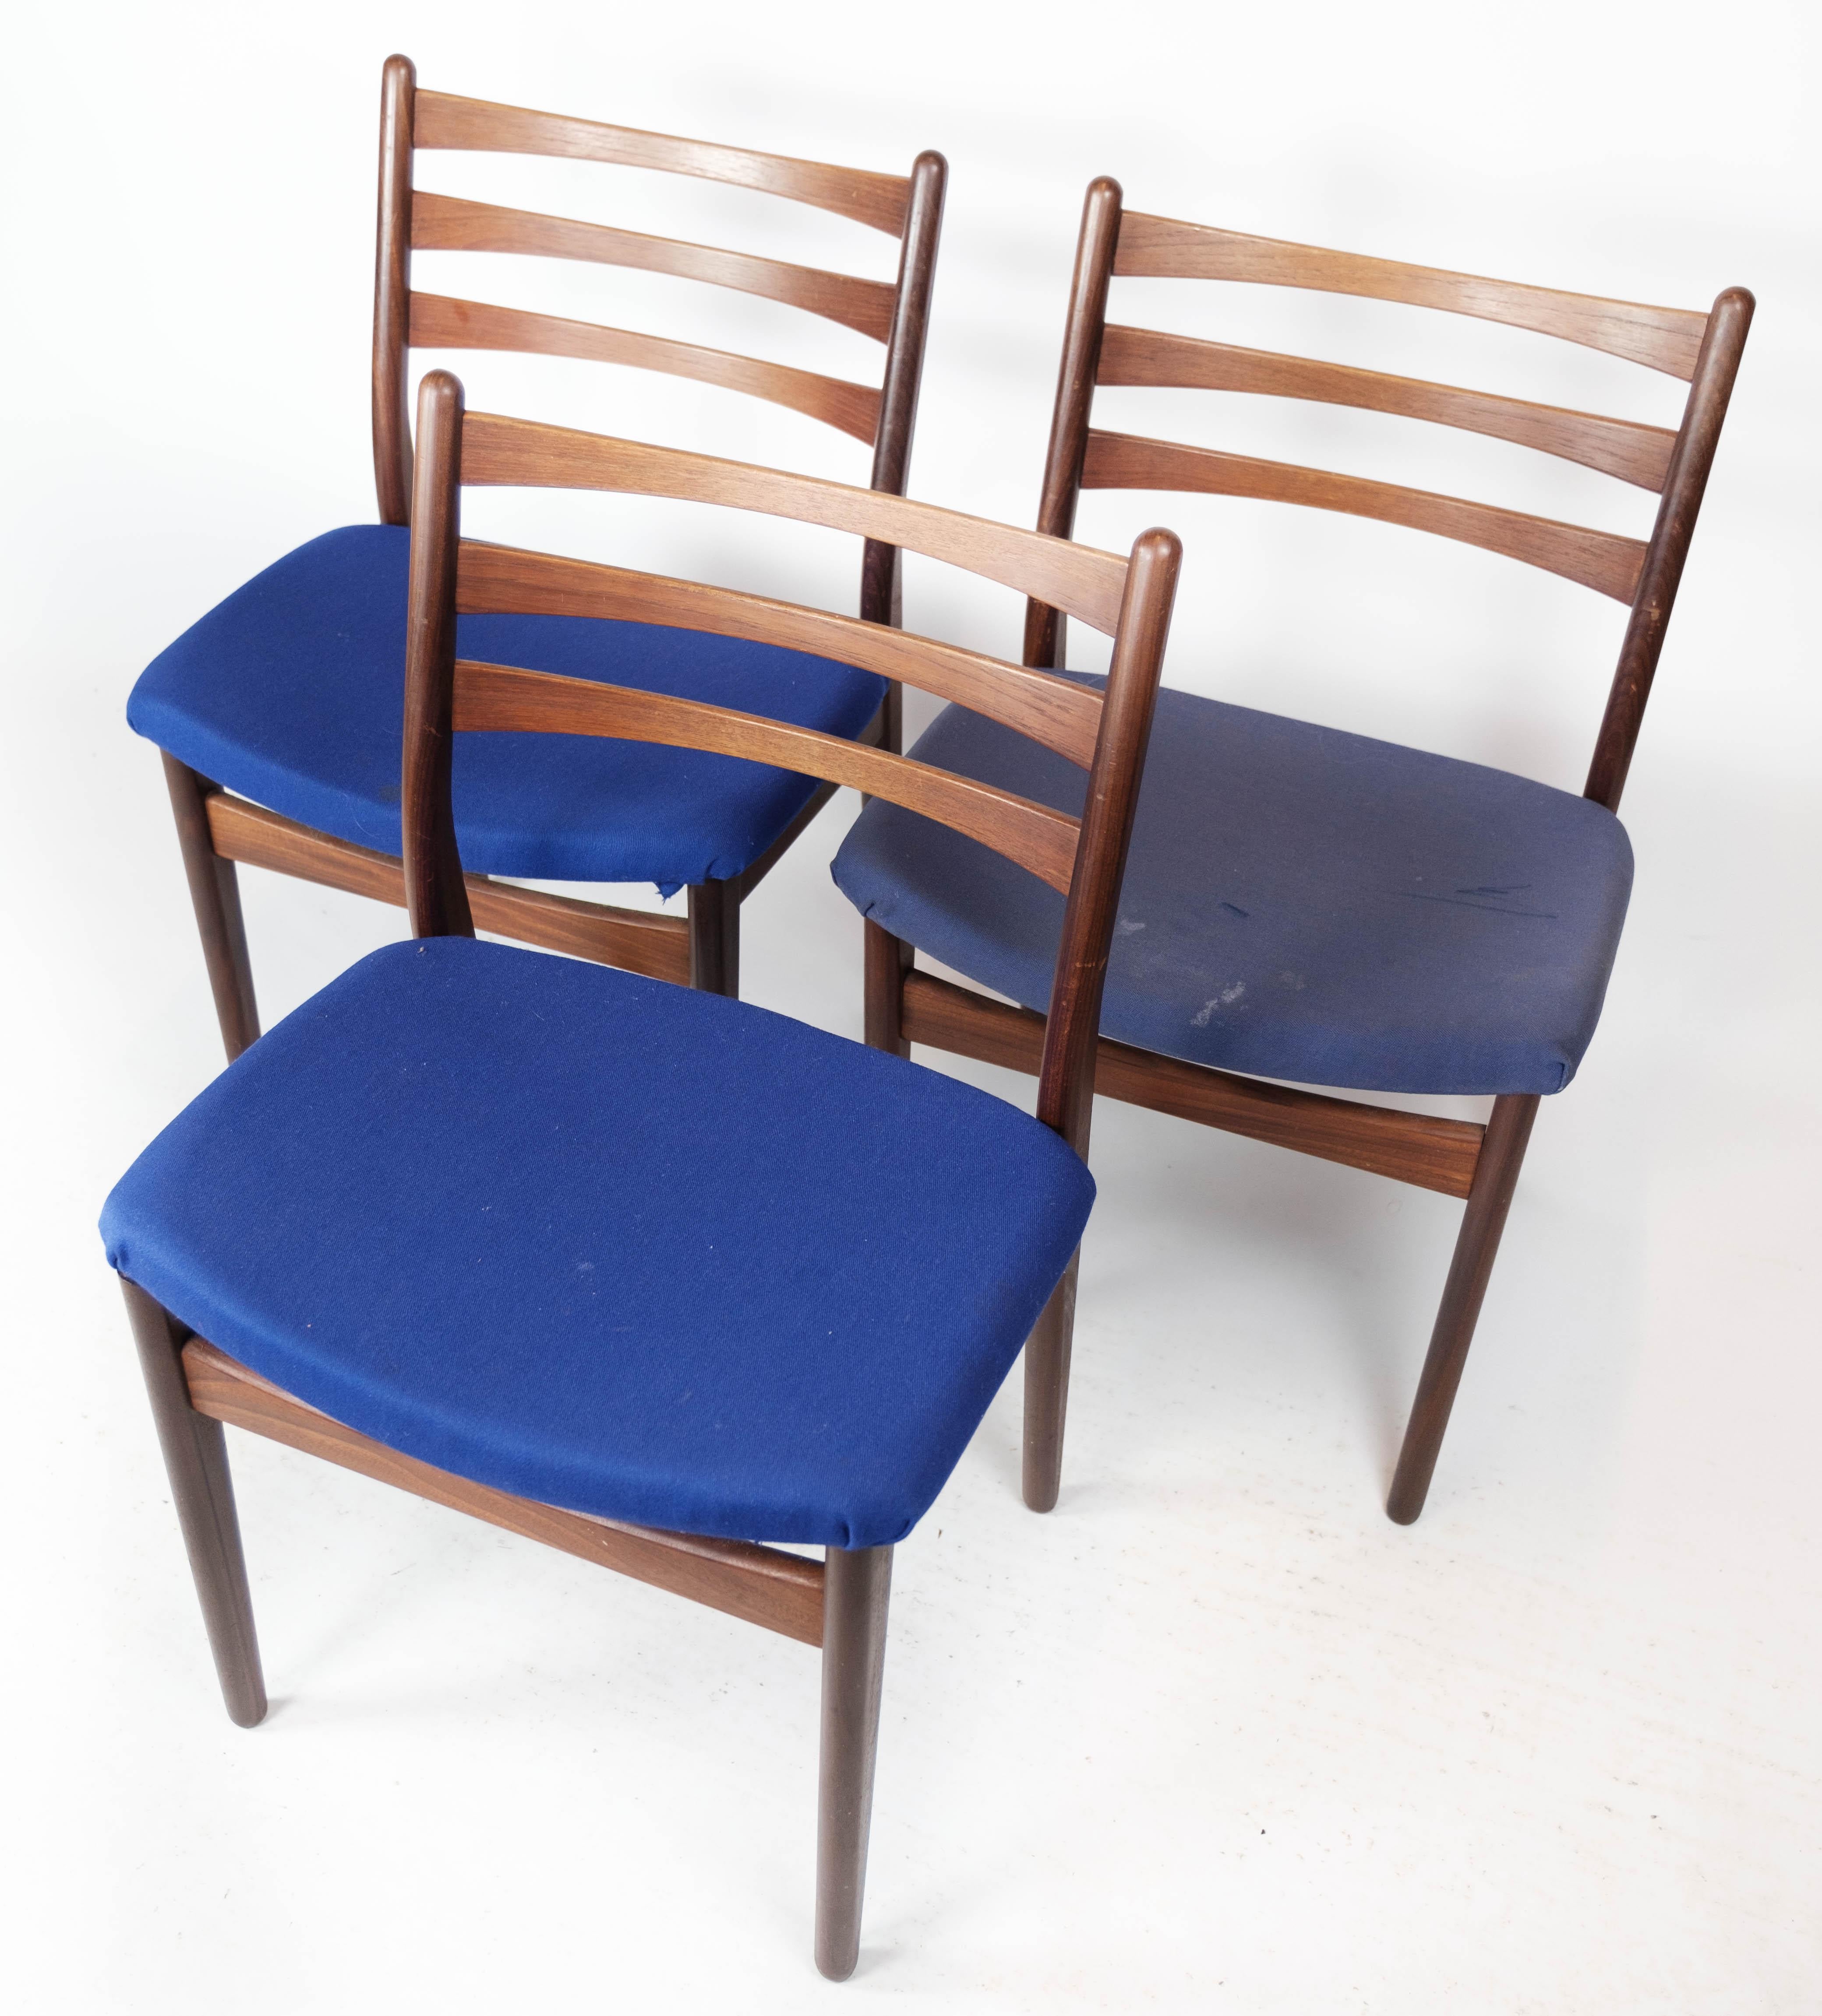 Set of three dining room chairs in teak and dark blue upholstery of Danish design from the 1960s. The chairs can be upholstered with optional fabric / leather as desired.